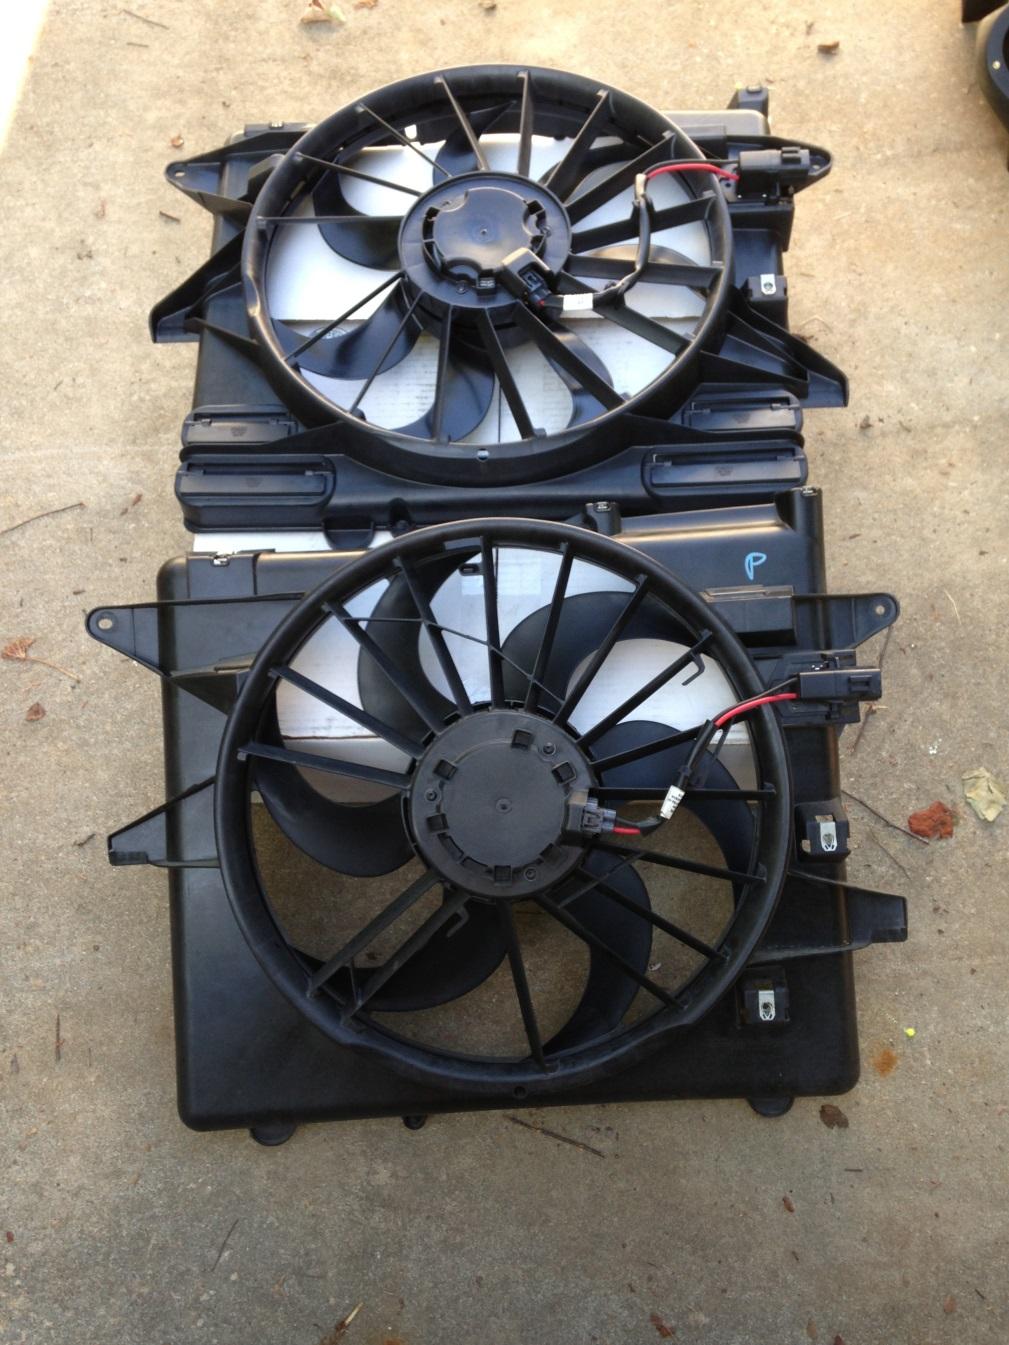 17. Remove the factory fan assembly by pulling it up, alternating between left and right until the fan clears the vehicle.